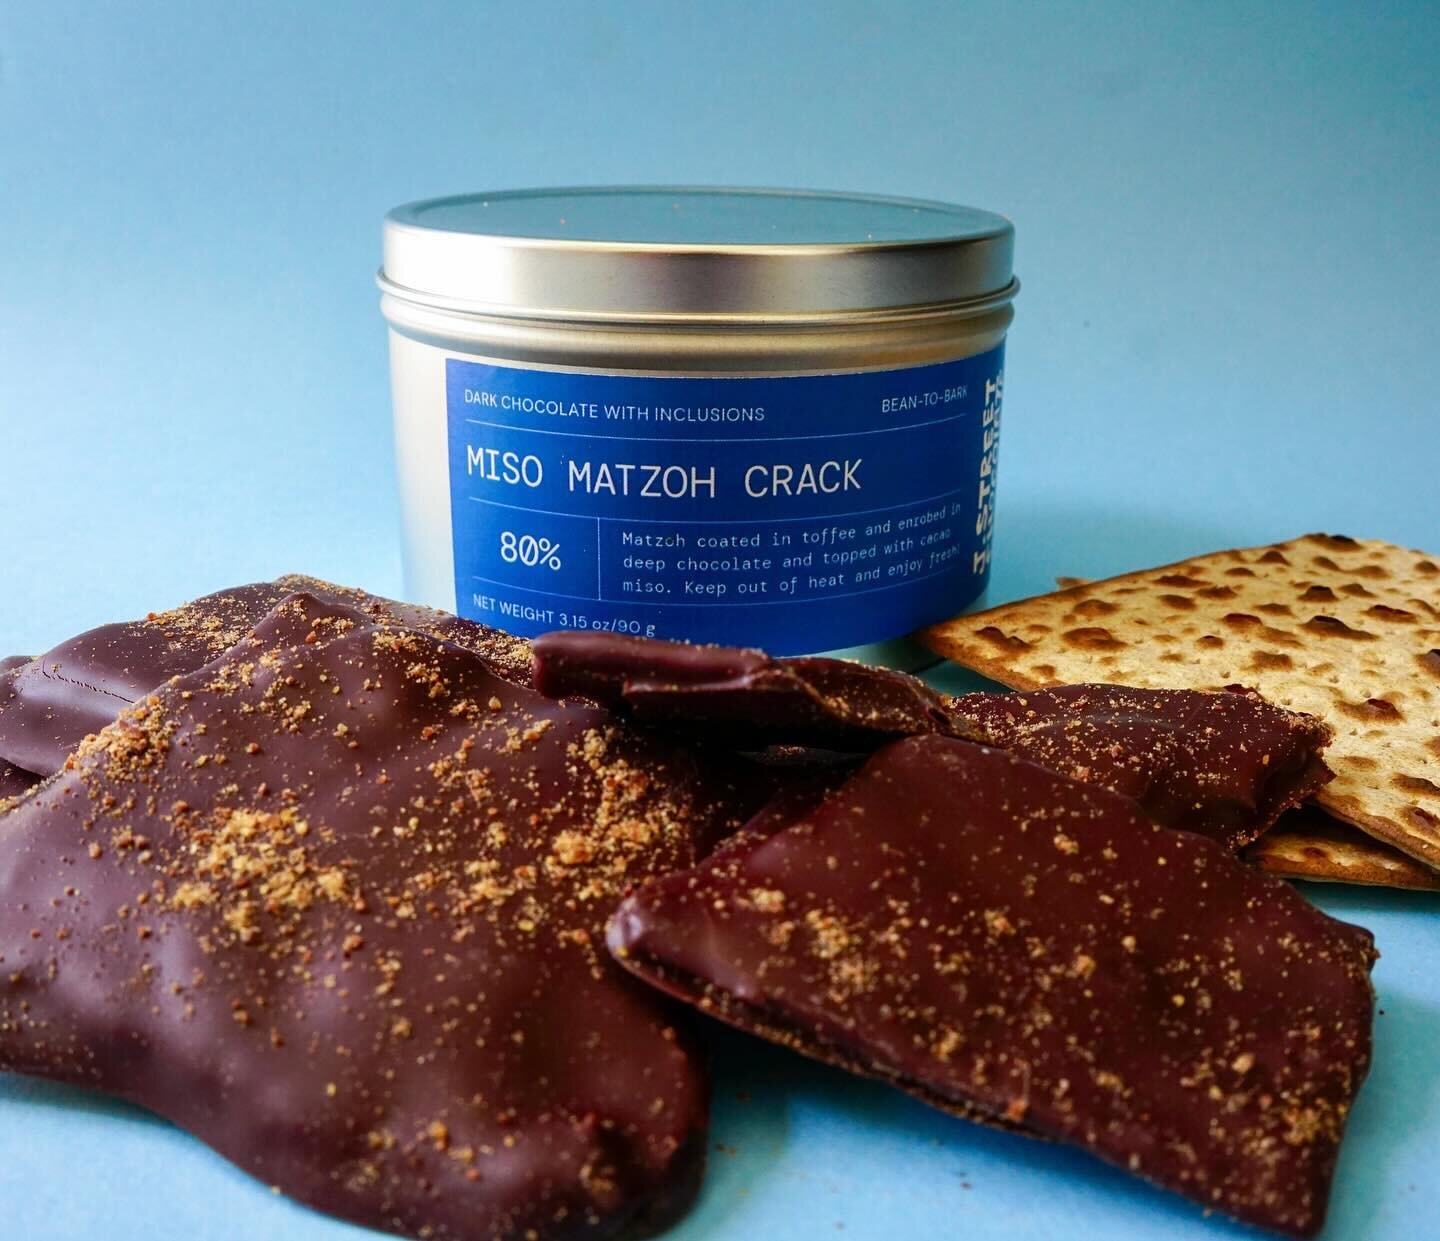 Miso Matzoh Crack is back! Matzoh is covered in toffee and enrobed in a deep dark chocolate and topped with powdered cacao miso. It hits all the right notes 🎶!

Stock is limited as I had preorders first but if demand is there I can always make more 